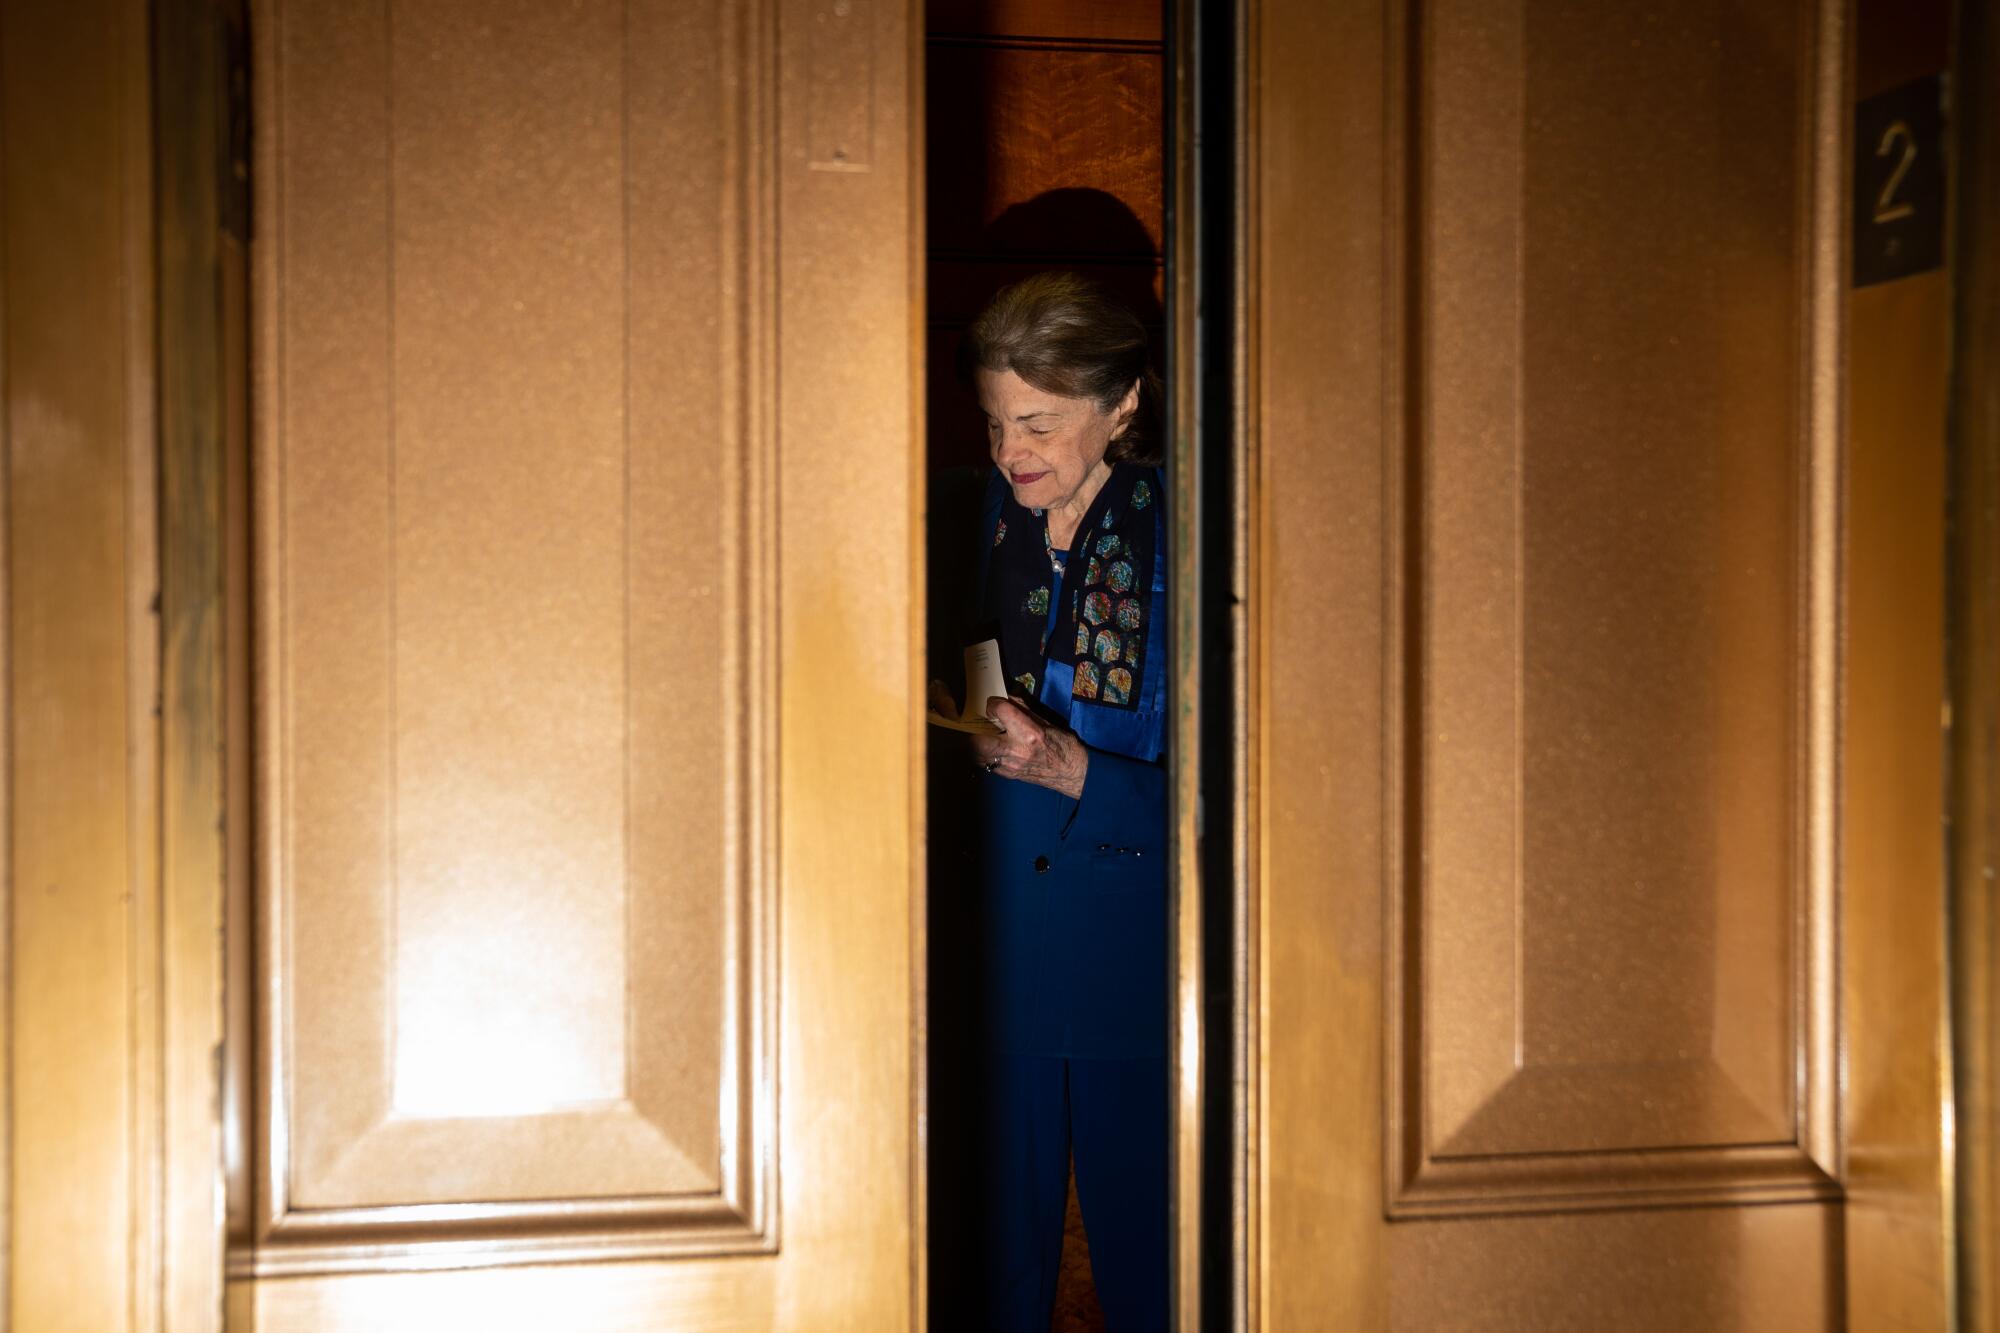 Sen. Dianne Feinstein (D-CA) leaves the Senate Chamber following a vote at the U.S. Capitol